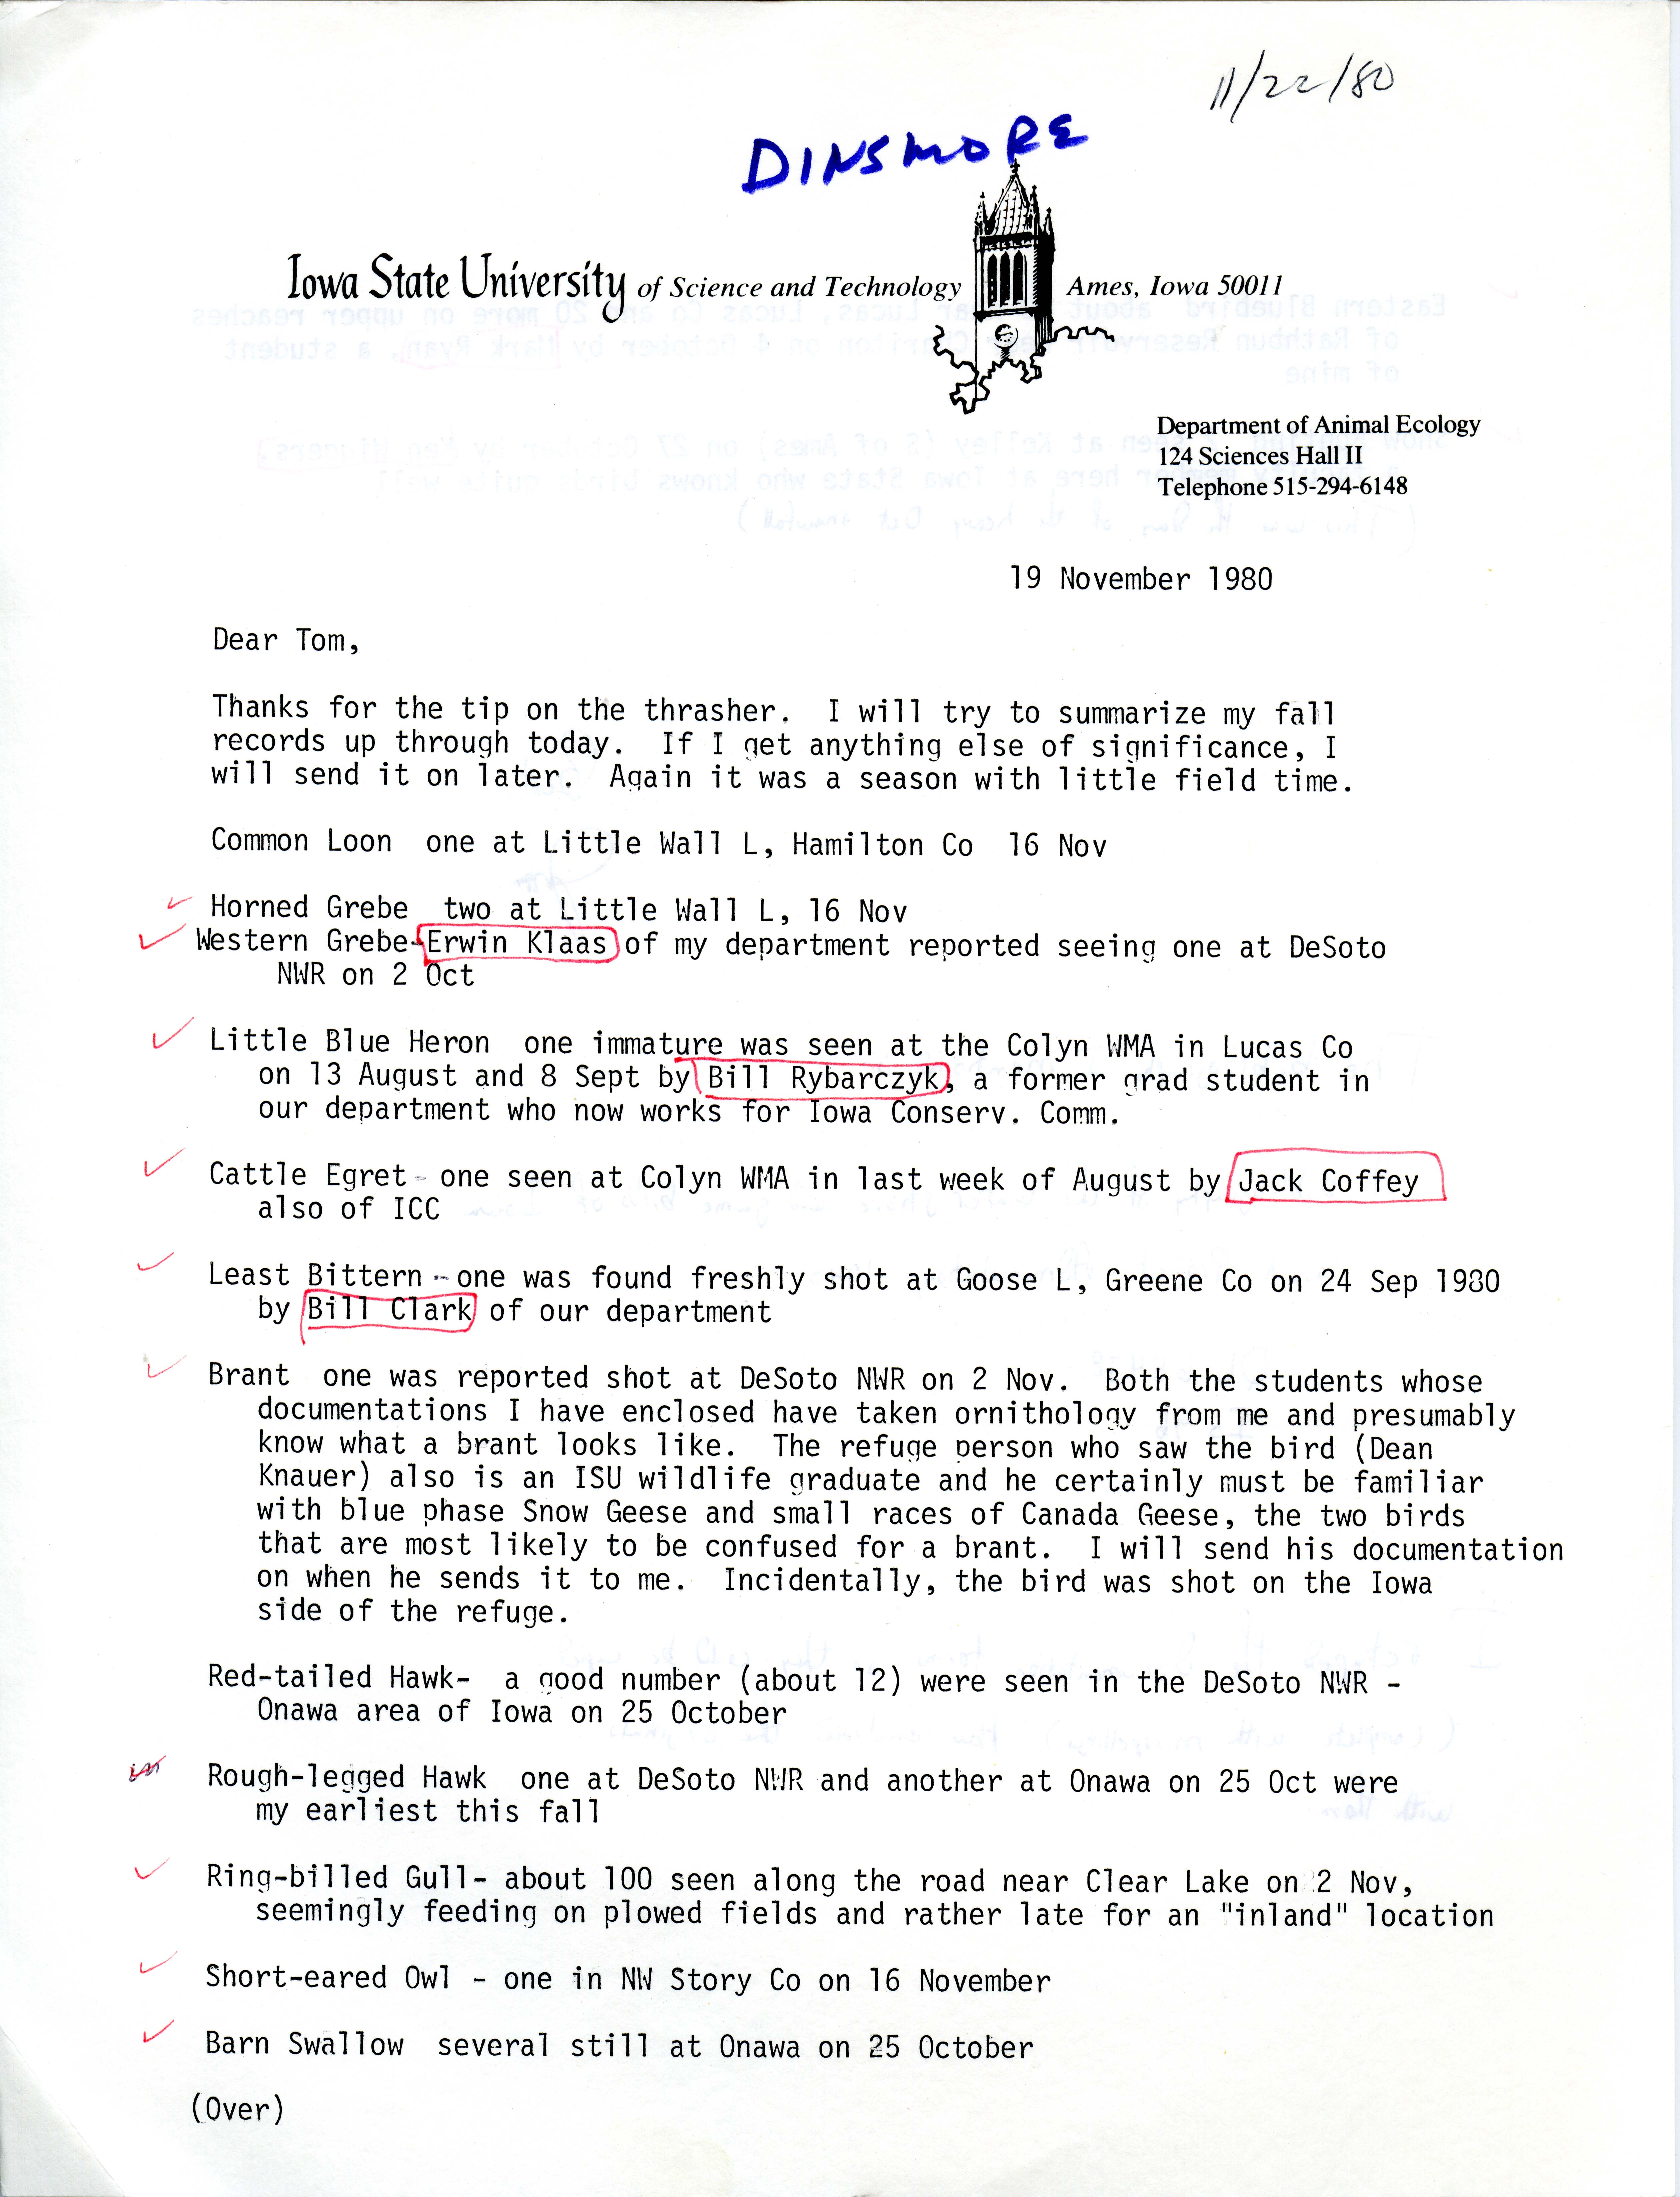 Jim Dinsmore letter to Thomas Kent regarding birds sighted by himself and others, November 19, 1980